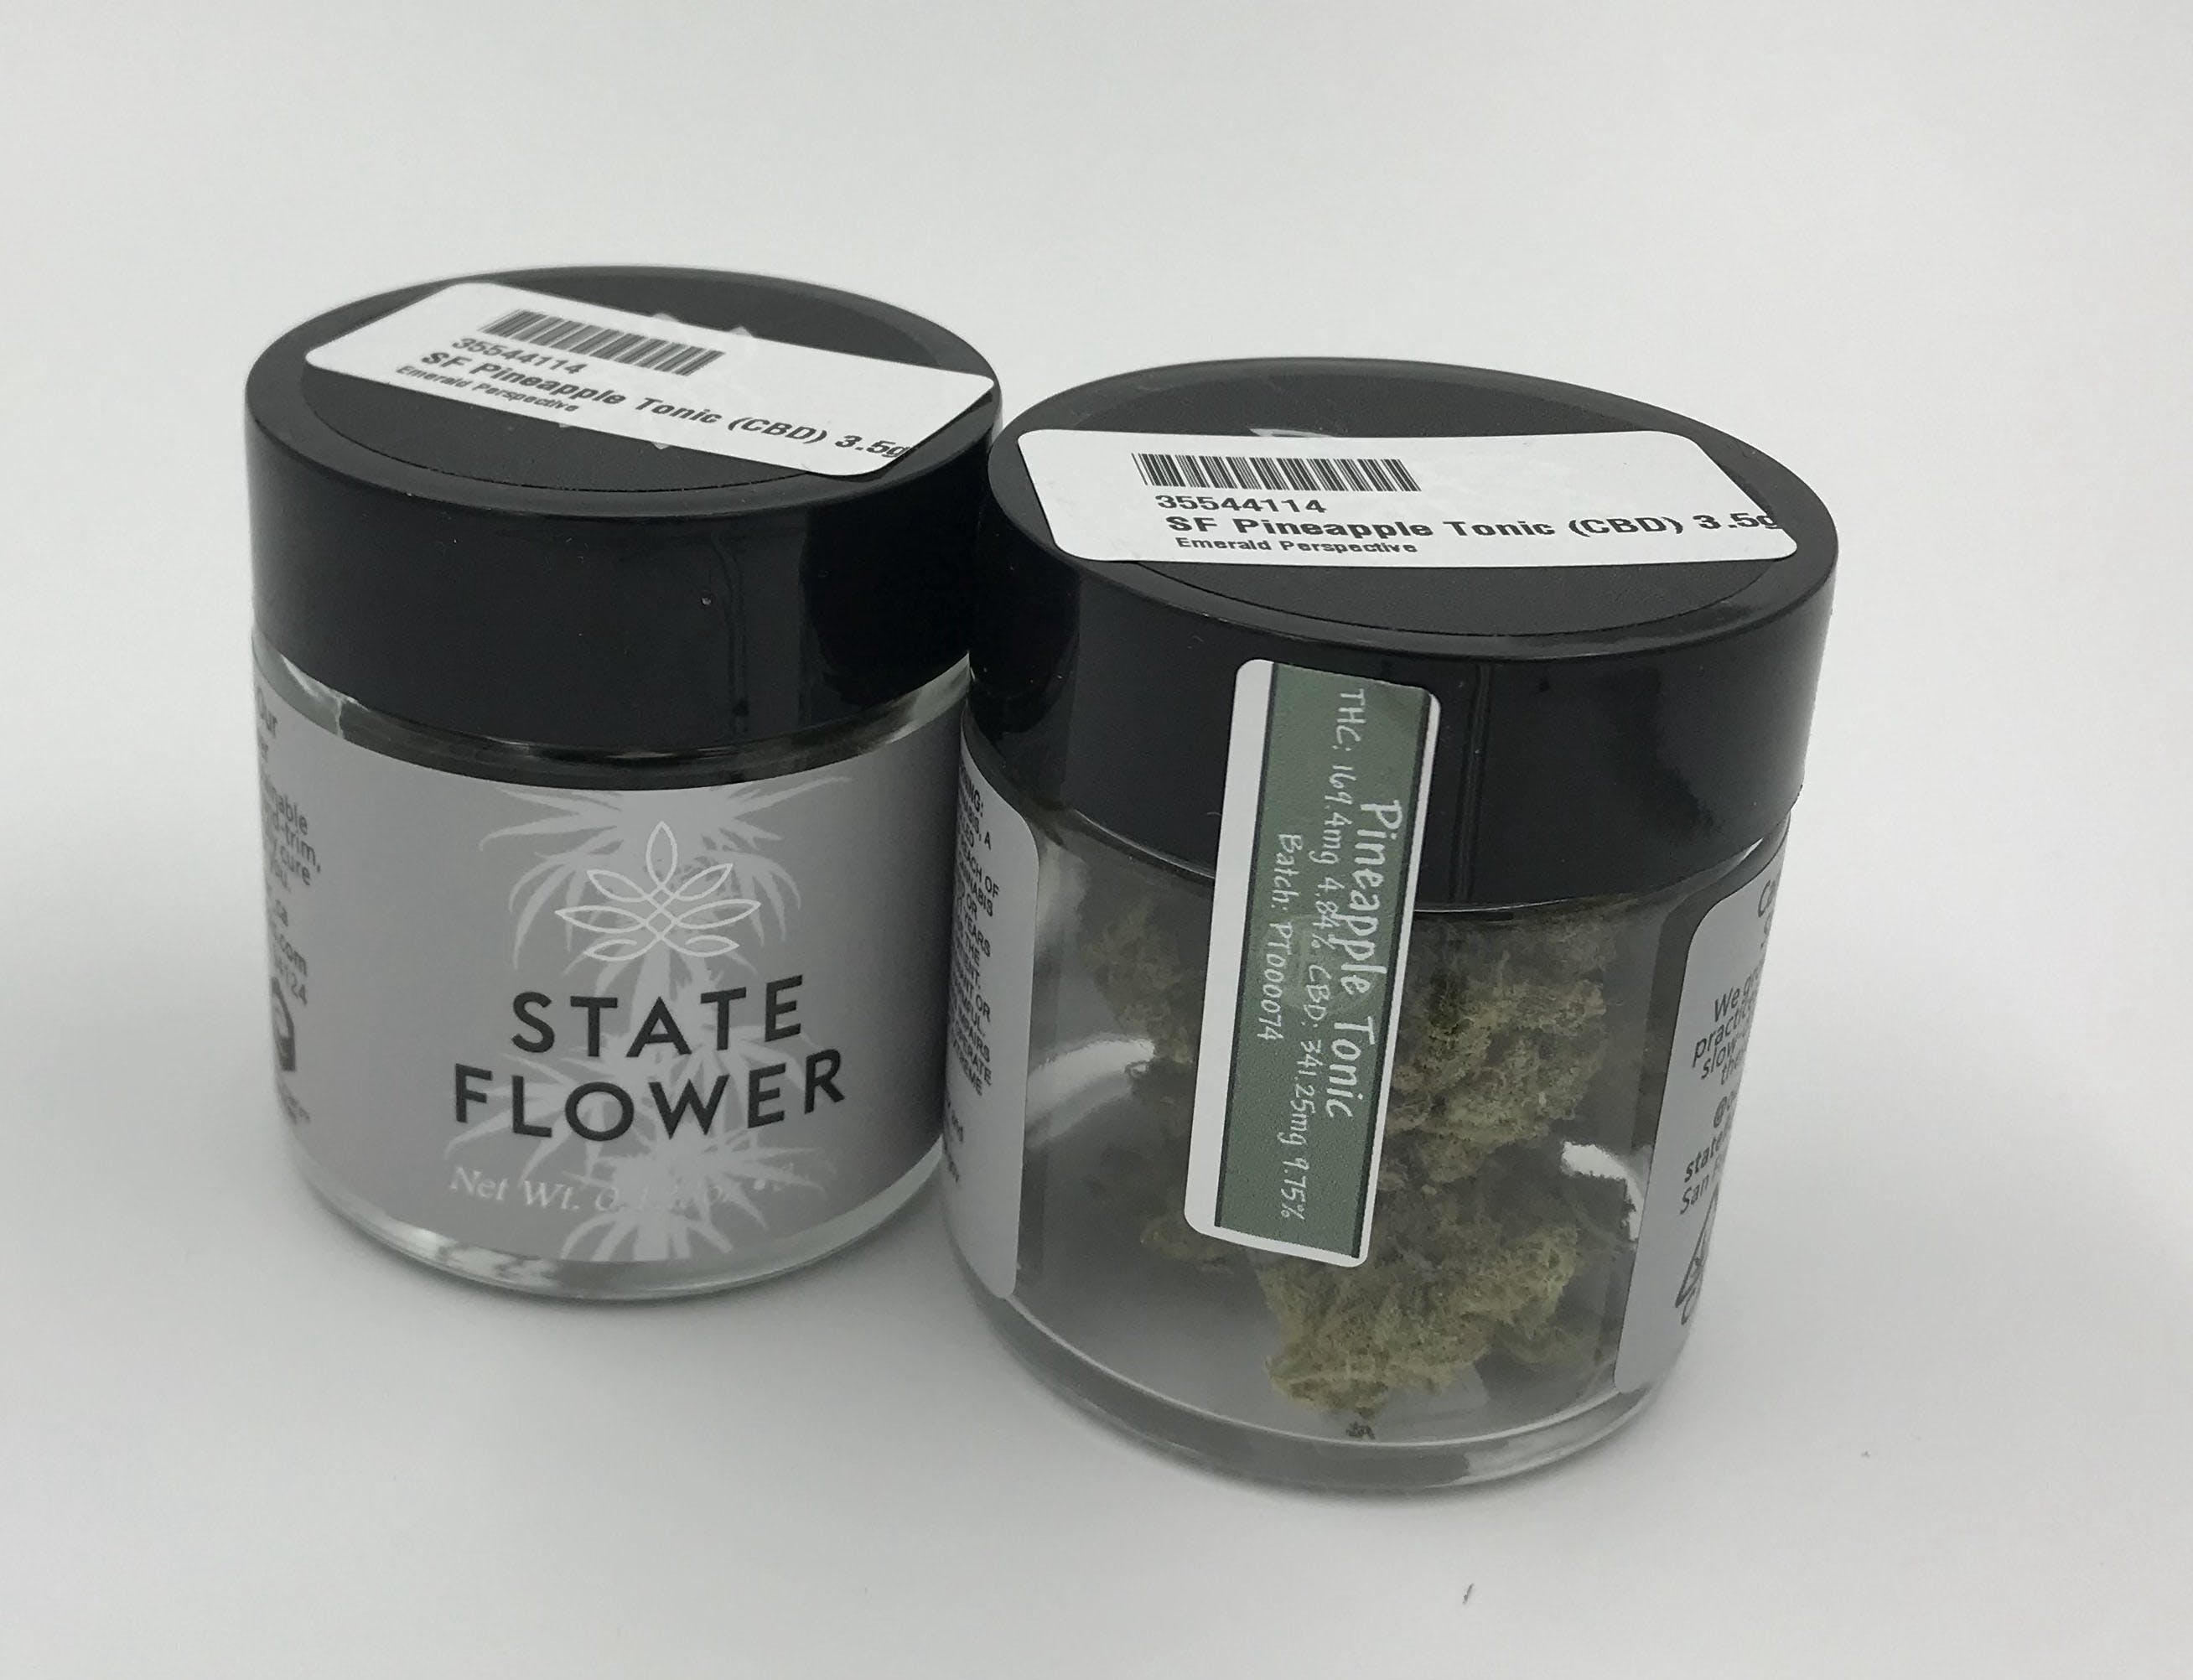 sativa-pineapple-tonic-by-state-flower-cannabis